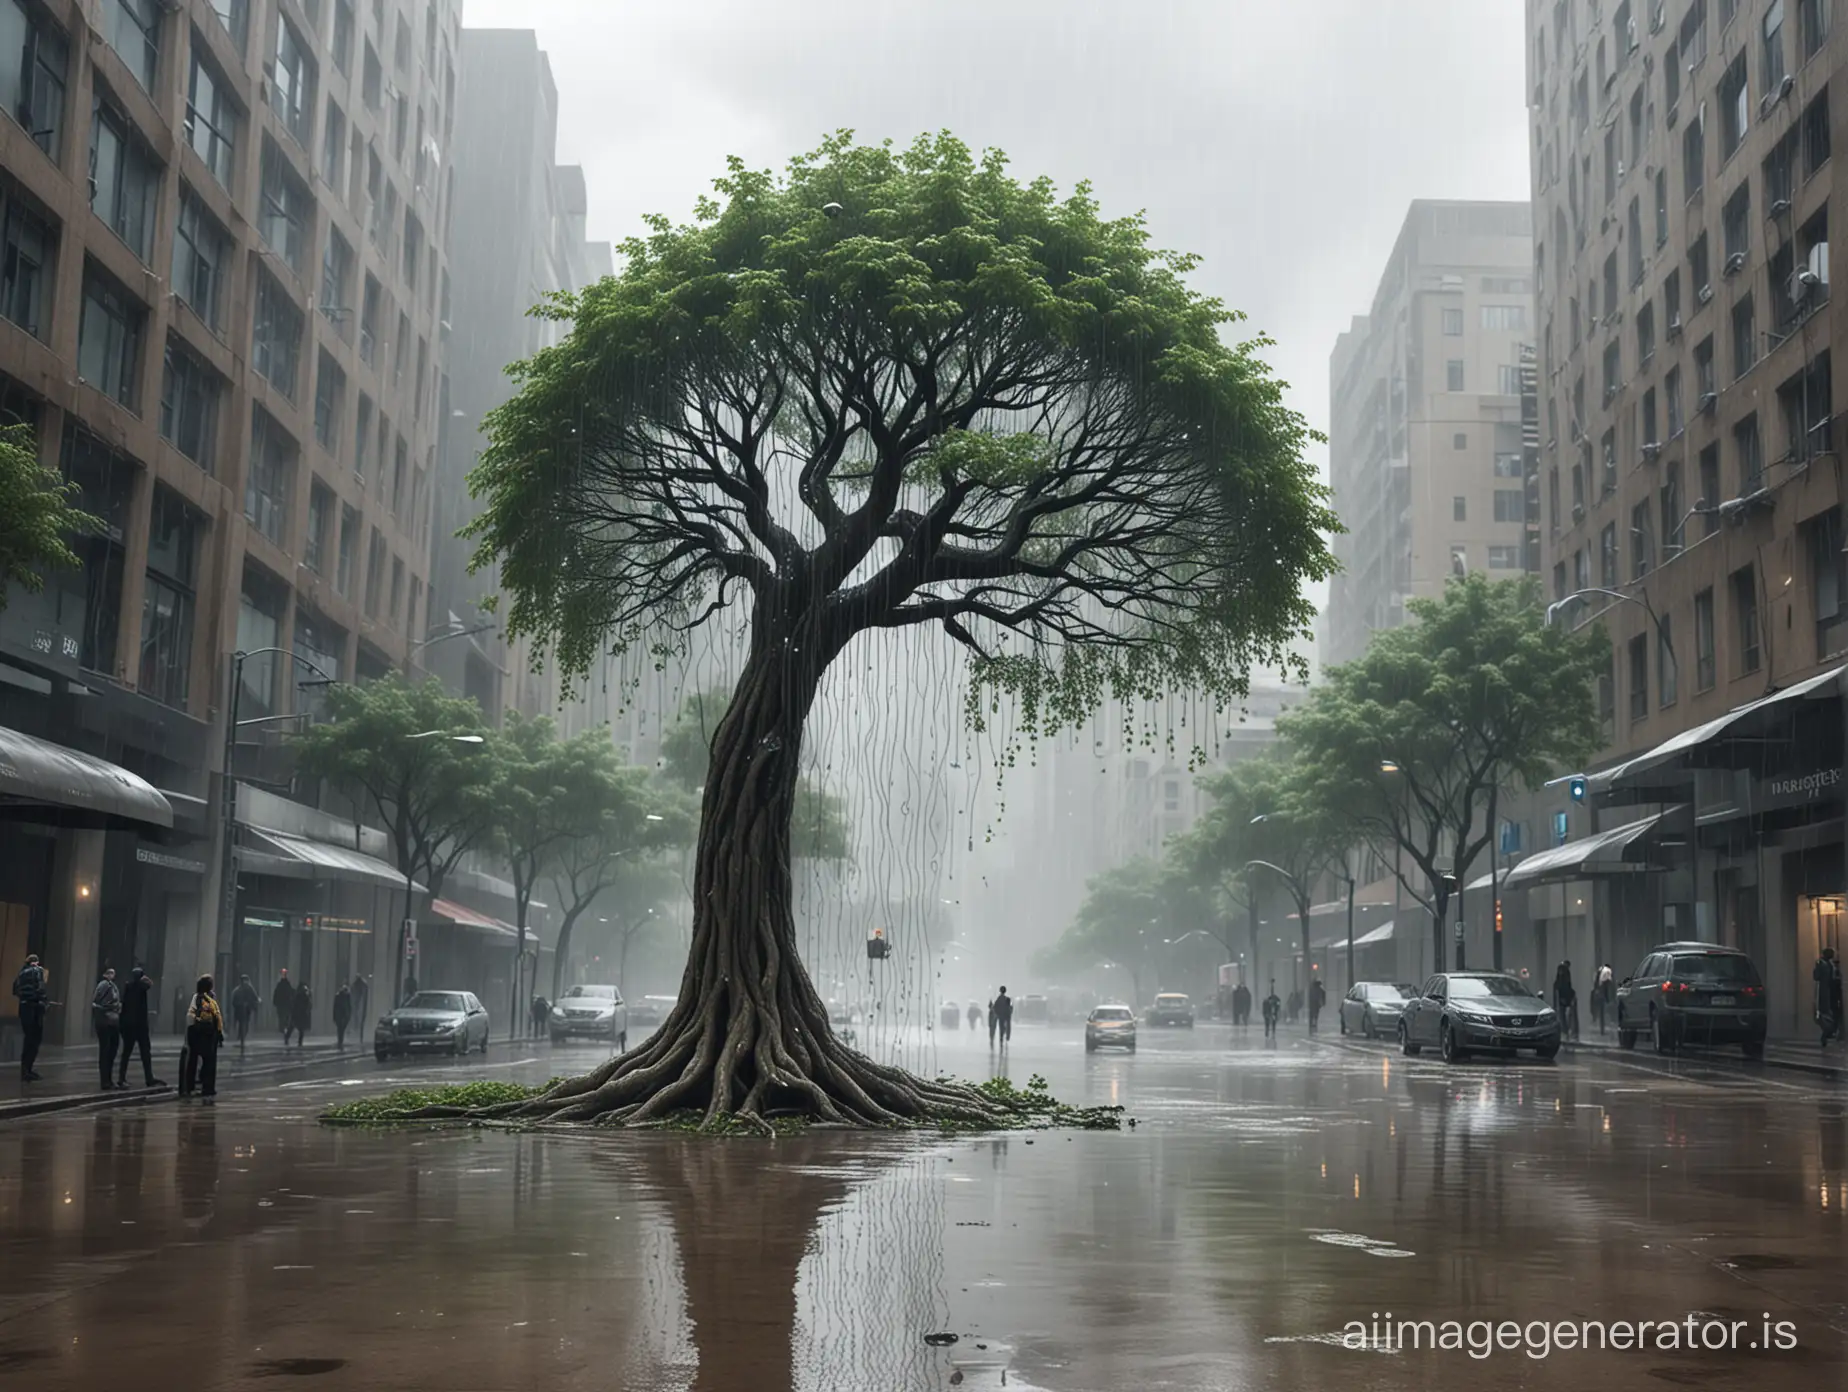 year 2050, one biomorphic designed tree collecting water in city while it rains